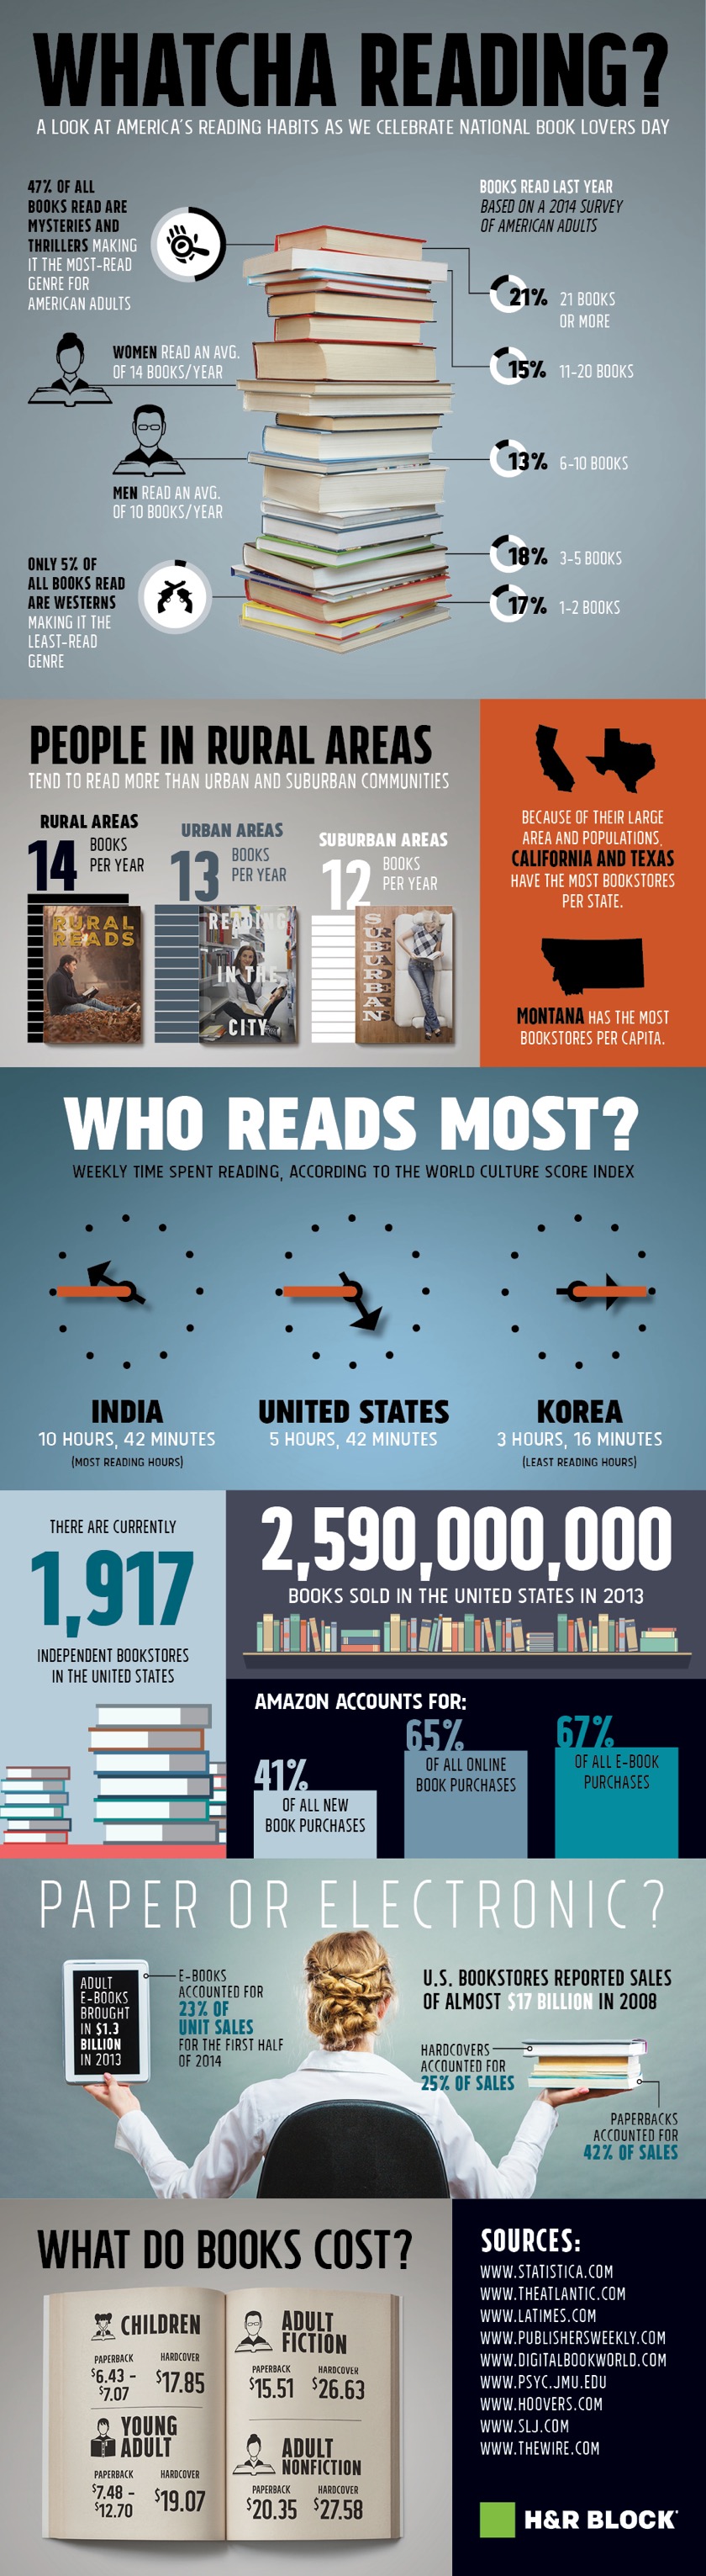 Reading-habits-in-the-U.S.-infographic